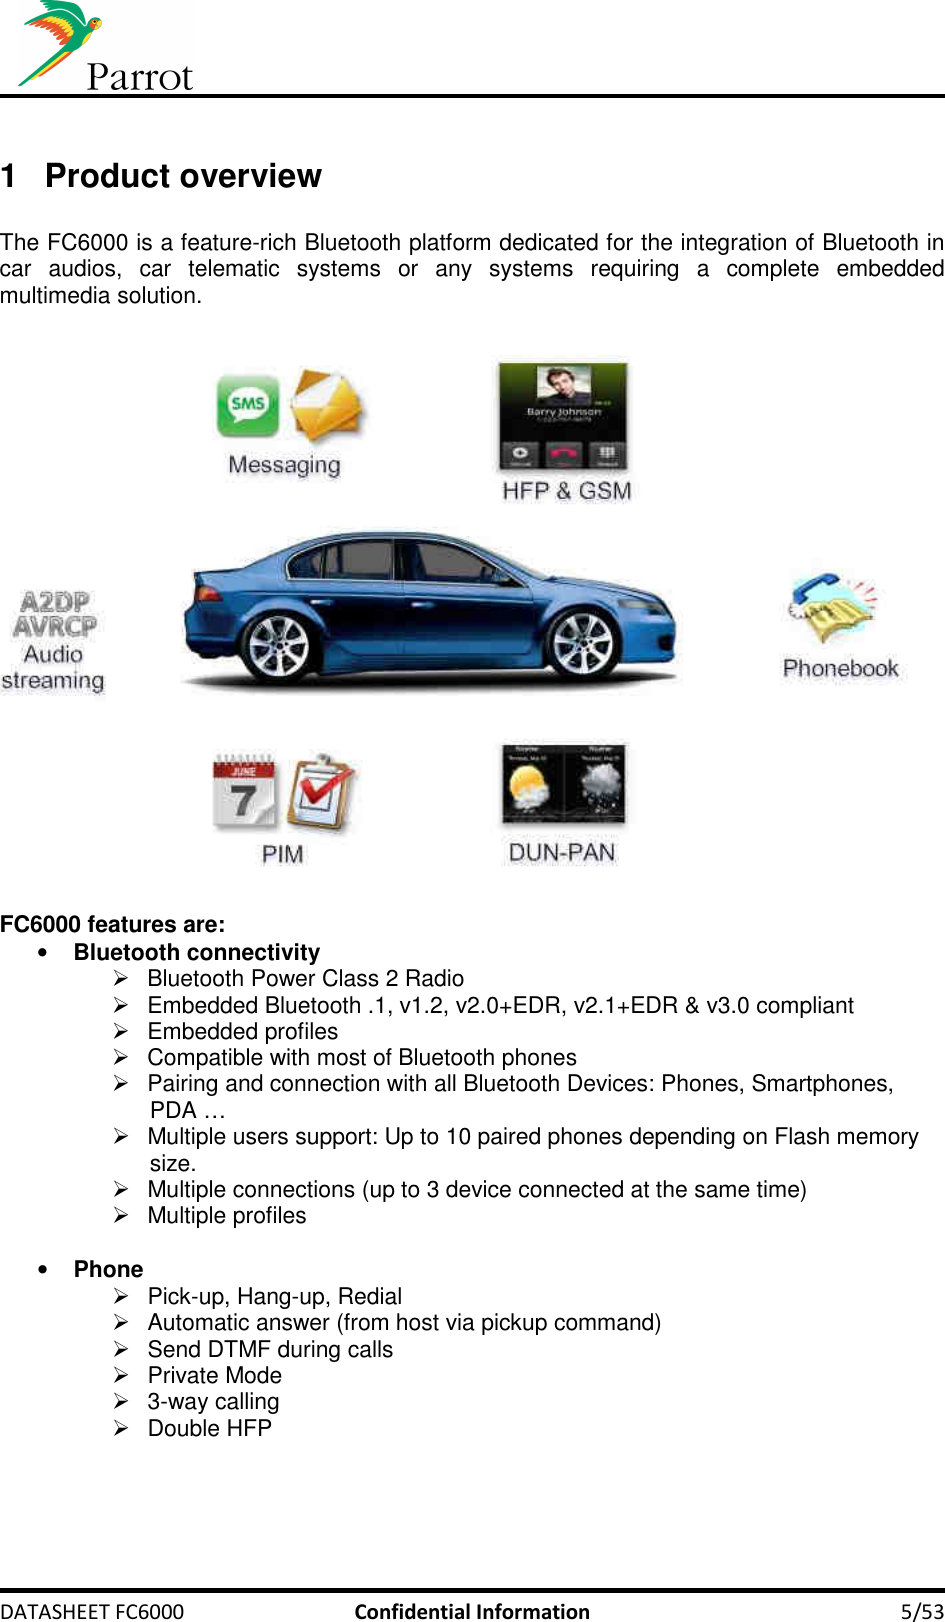     DATASHEET FC6000  Confidential Information  5/53  1  Product overview  The FC6000 is a feature-rich Bluetooth platform dedicated for the integration of Bluetooth in car  audios,  car  telematic  systems  or  any  systems  requiring  a  complete  embedded multimedia solution.     FC6000 features are: • Bluetooth connectivity   Bluetooth Power Class 2 Radio   Embedded Bluetooth .1, v1.2, v2.0+EDR, v2.1+EDR &amp; v3.0 compliant   Embedded profiles   Compatible with most of Bluetooth phones   Pairing and connection with all Bluetooth Devices: Phones, Smartphones, PDA …   Multiple users support: Up to 10 paired phones depending on Flash memory size.   Multiple connections (up to 3 device connected at the same time)   Multiple profiles   • Phone   Pick-up, Hang-up, Redial   Automatic answer (from host via pickup command)   Send DTMF during calls   Private Mode   3-way calling   Double HFP 